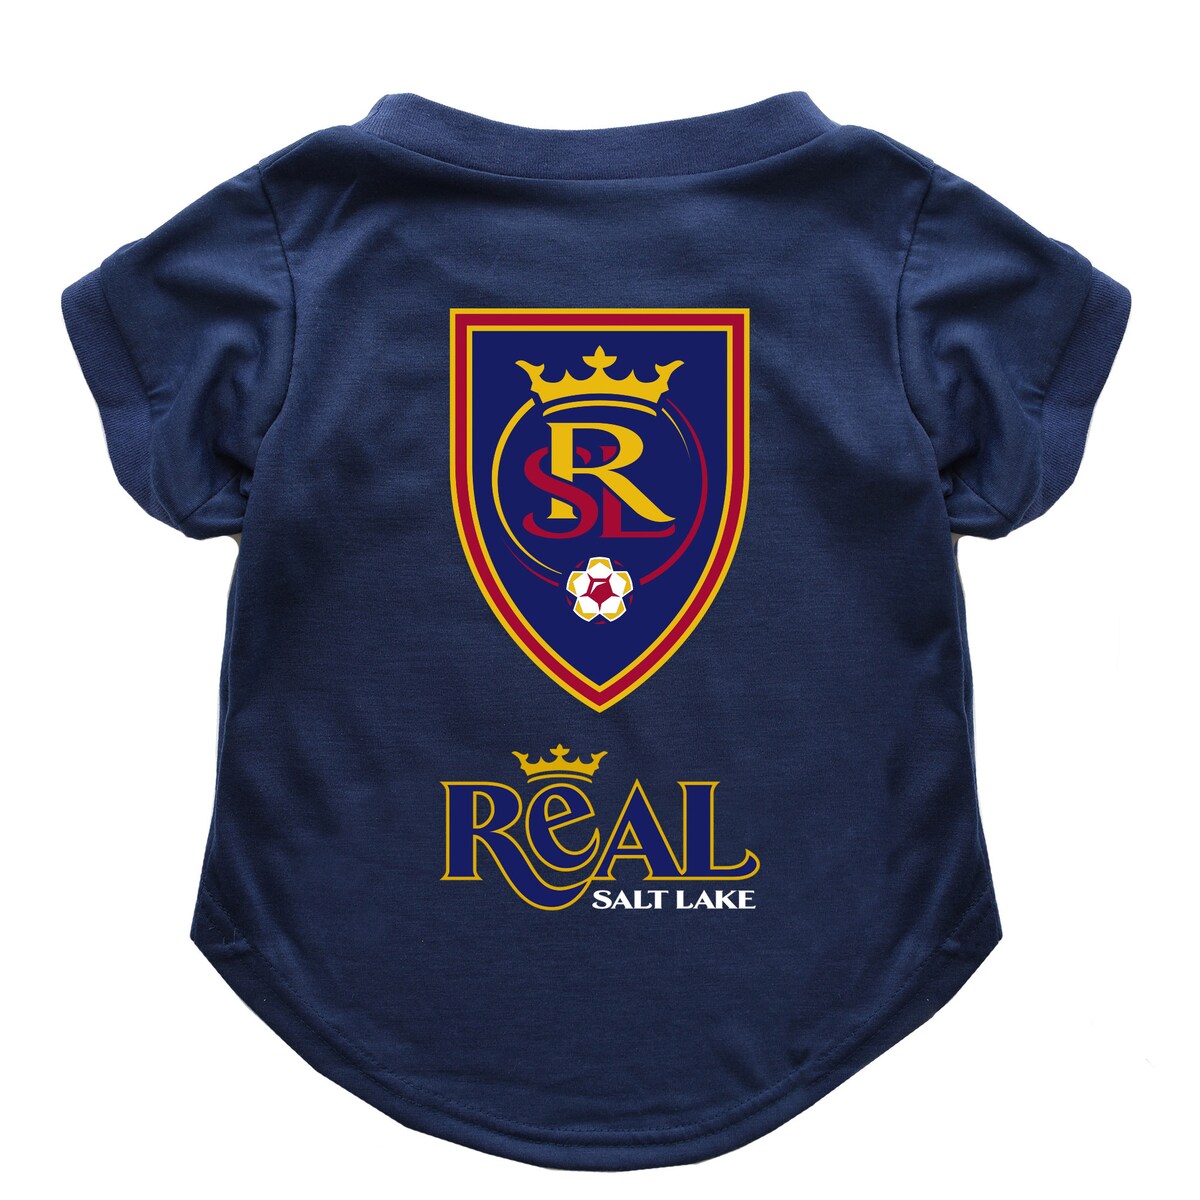 Help your best friend showcase their FURocity on Real Salt Lake game days with this Little Earth Pet T-shirt. It features striking Real Salt Lake graphics that let everyone know who they woof for on the pitch.Screen print graphicsOfficially licensedSize L fits 28-42lbs.Machine wash, tumble dry lowSize 2XL fits 58-80lbs.Short sleeveSize XL fits 40-60lbs.ImportedBrand: Little EarthSize M fits 18-30lbs.Size S fits 12-20lbs.Crew neck